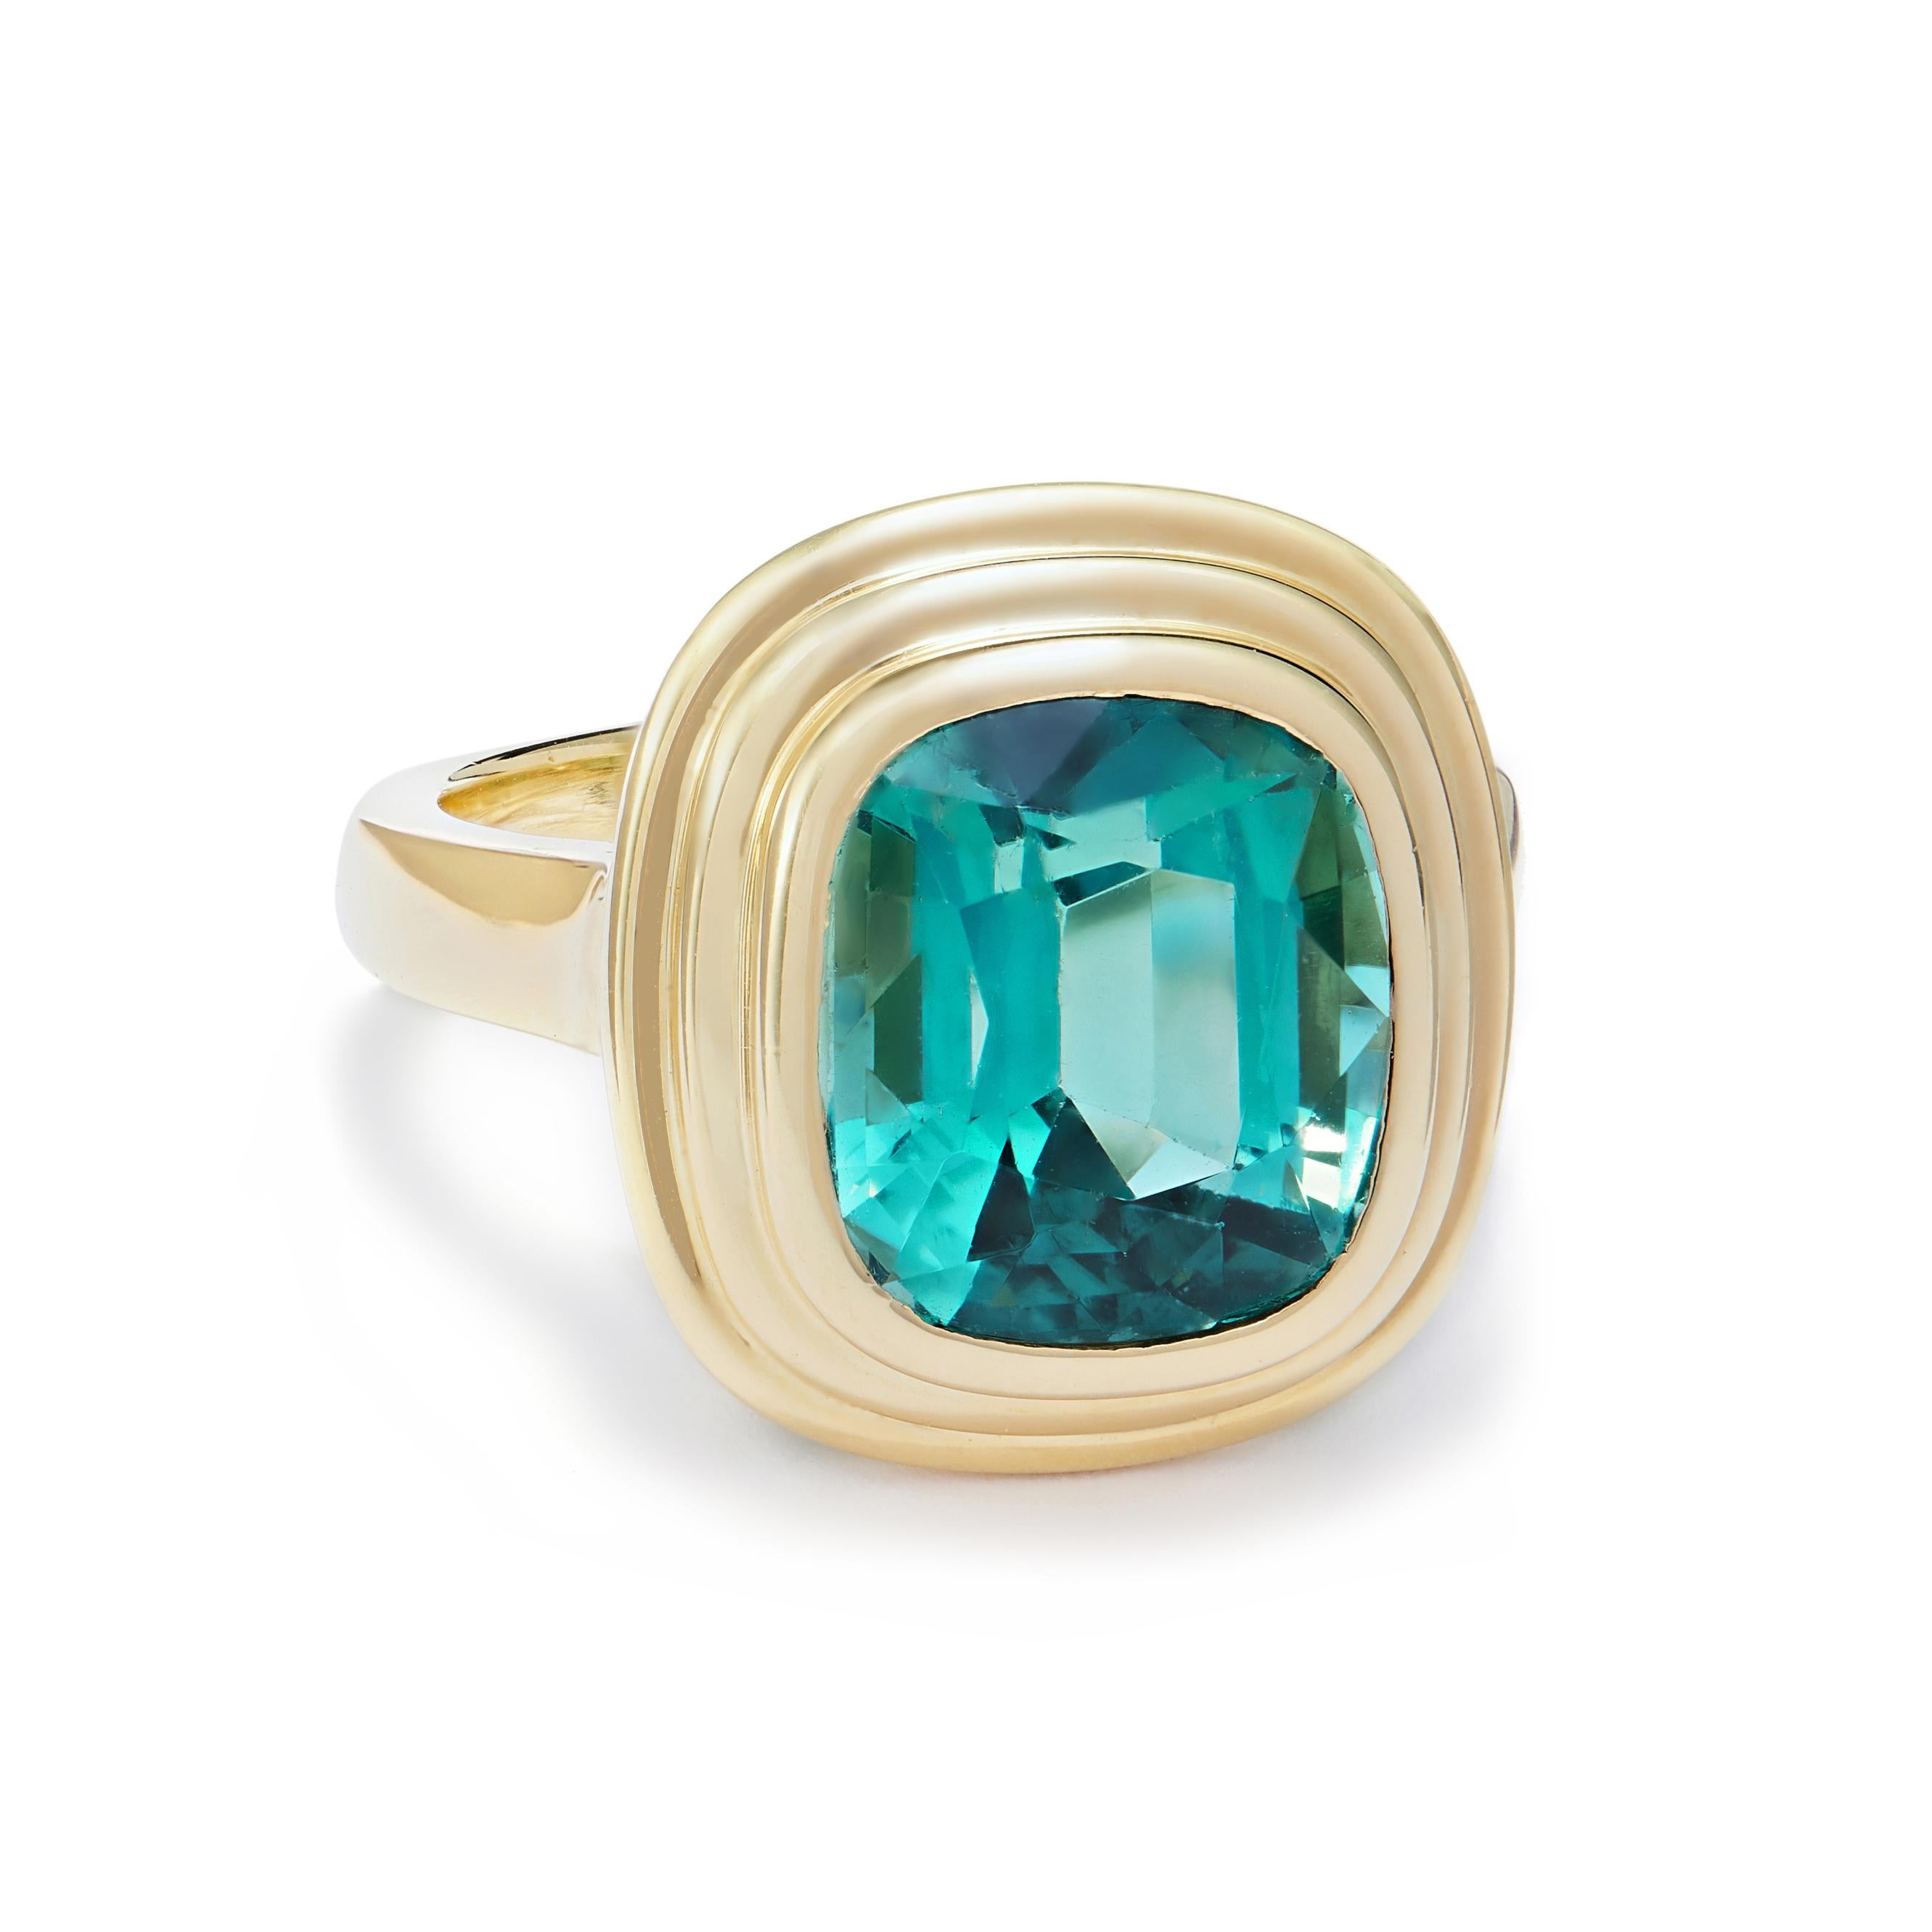 6.34 carat Blue Tourmaline ring set in 18 karat yellow gold. This beautiful blue Tourmaline is a one-of-a-kind Teal colour in a wonderful statement size, forever changing in different lights. The gemstone has a few minor natural inclusions (typical